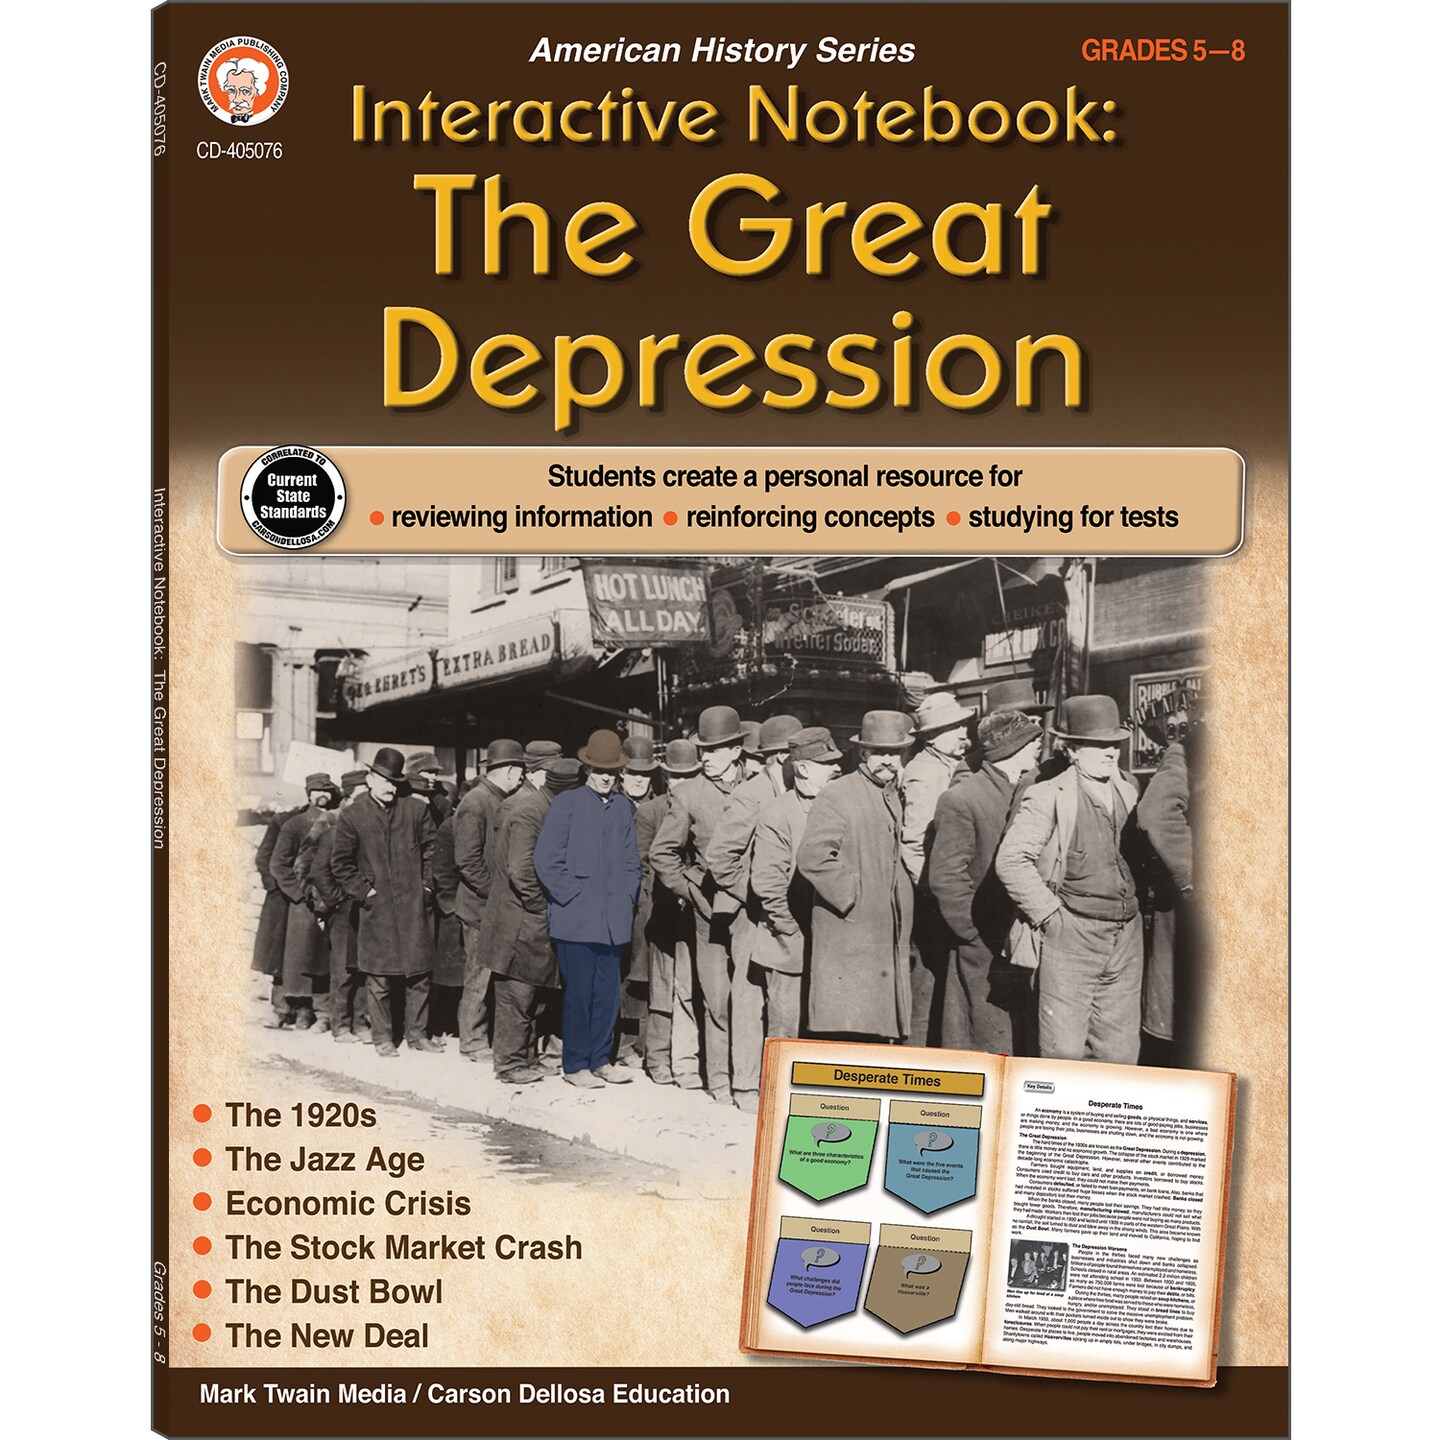 The　Market　Mark　Social　Stock　5-8　New　(64　Deal,　Workbook,　or　Crash,　Pgs)　Lessons　Twain　Great　The　Interactive　on　1920's,　The　Classroom　Depression　Notebook—Grades　Homeschool　History　Studies　and　The　Michaels